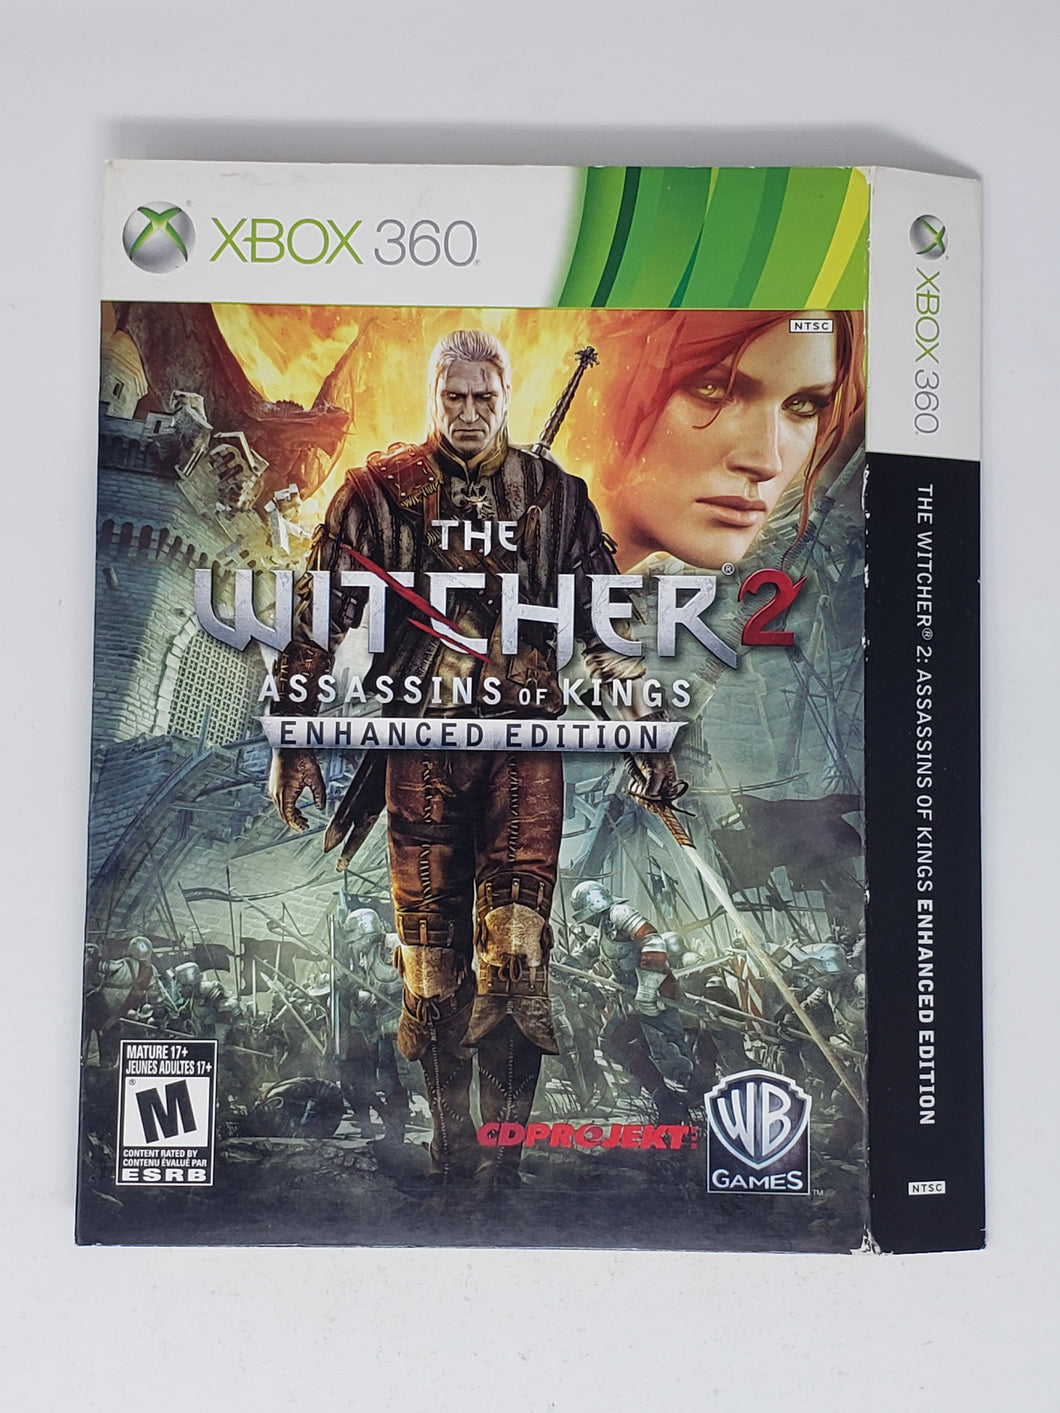 Witcher 2 - Assassins of Kings Enhanced Edition [Slip Cover] - Microsoft Xbox 360